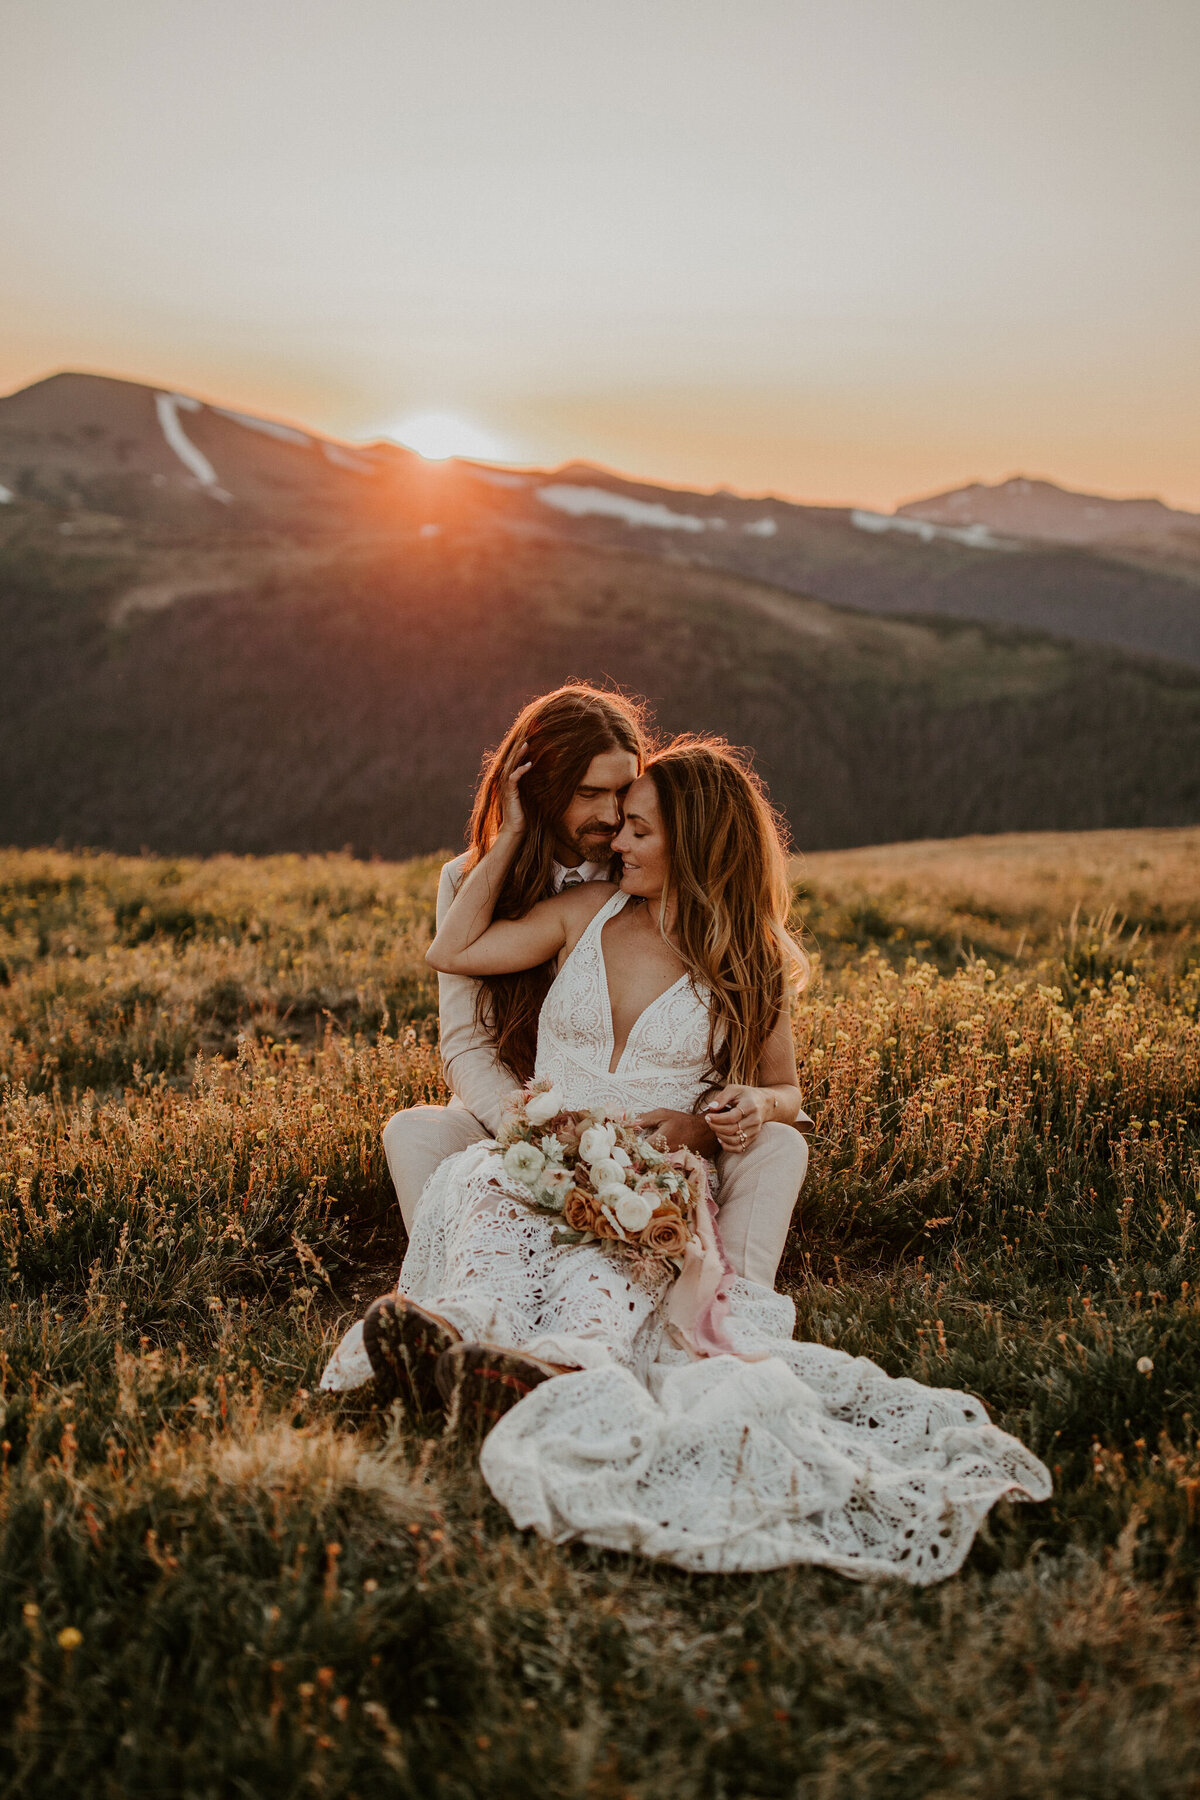 bride and groom pose holding each other at sundown in the mountains wearing a white wedding gown and ivory tuxedo